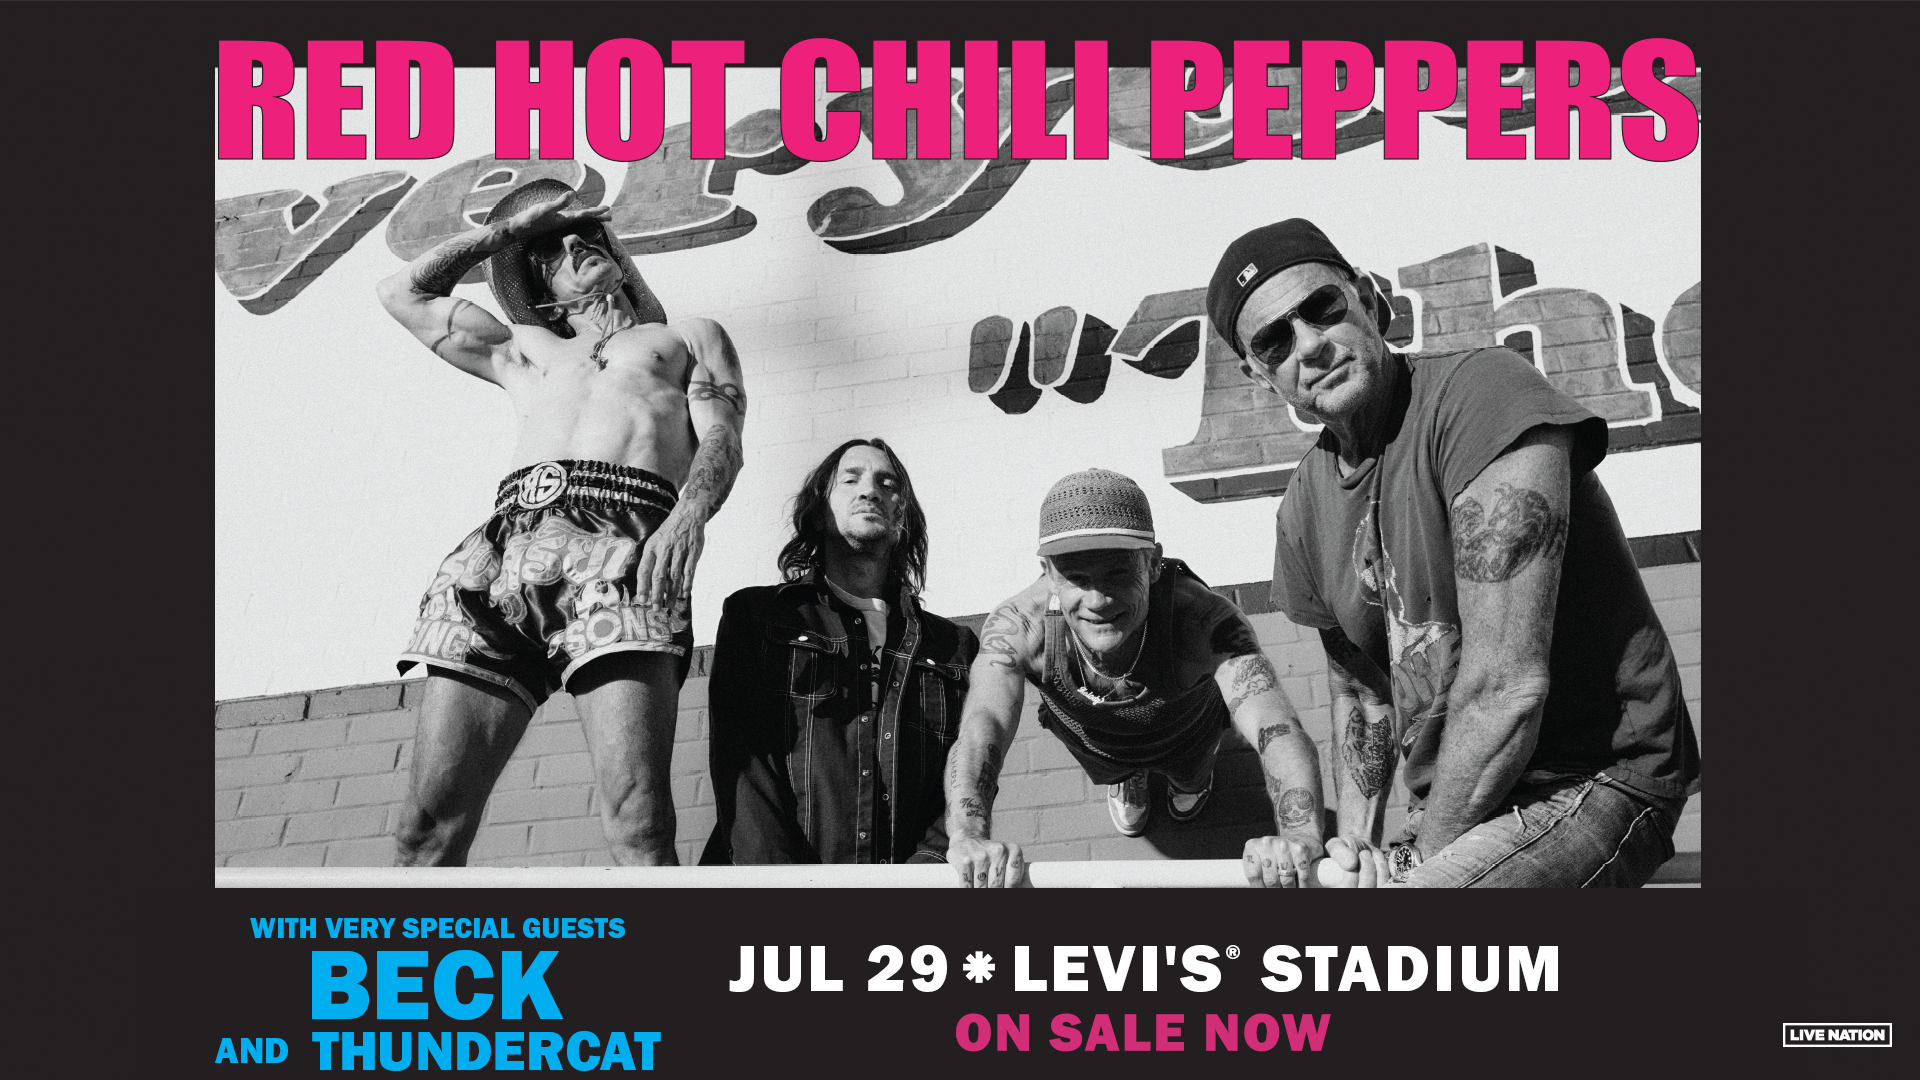 Introducir 34+ imagen red hot chili peppers levi’s stadium tickets